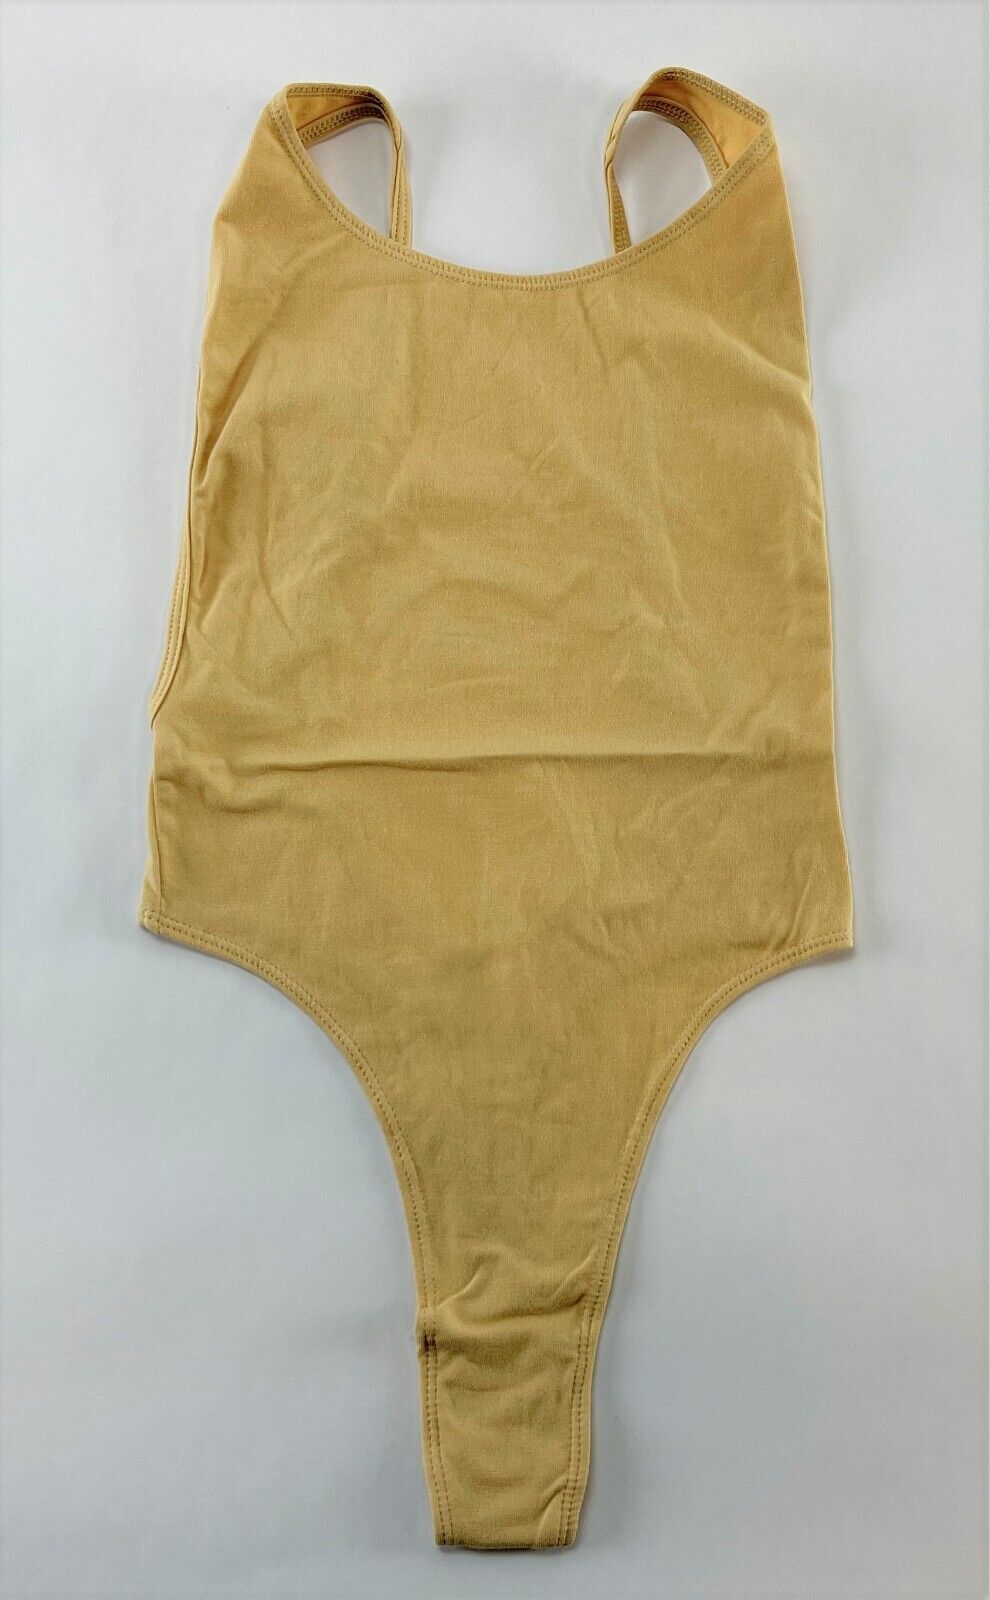 Ladies Thong Bodysuit from American Apparel Cotton Spandex Suit Nude - X-Small